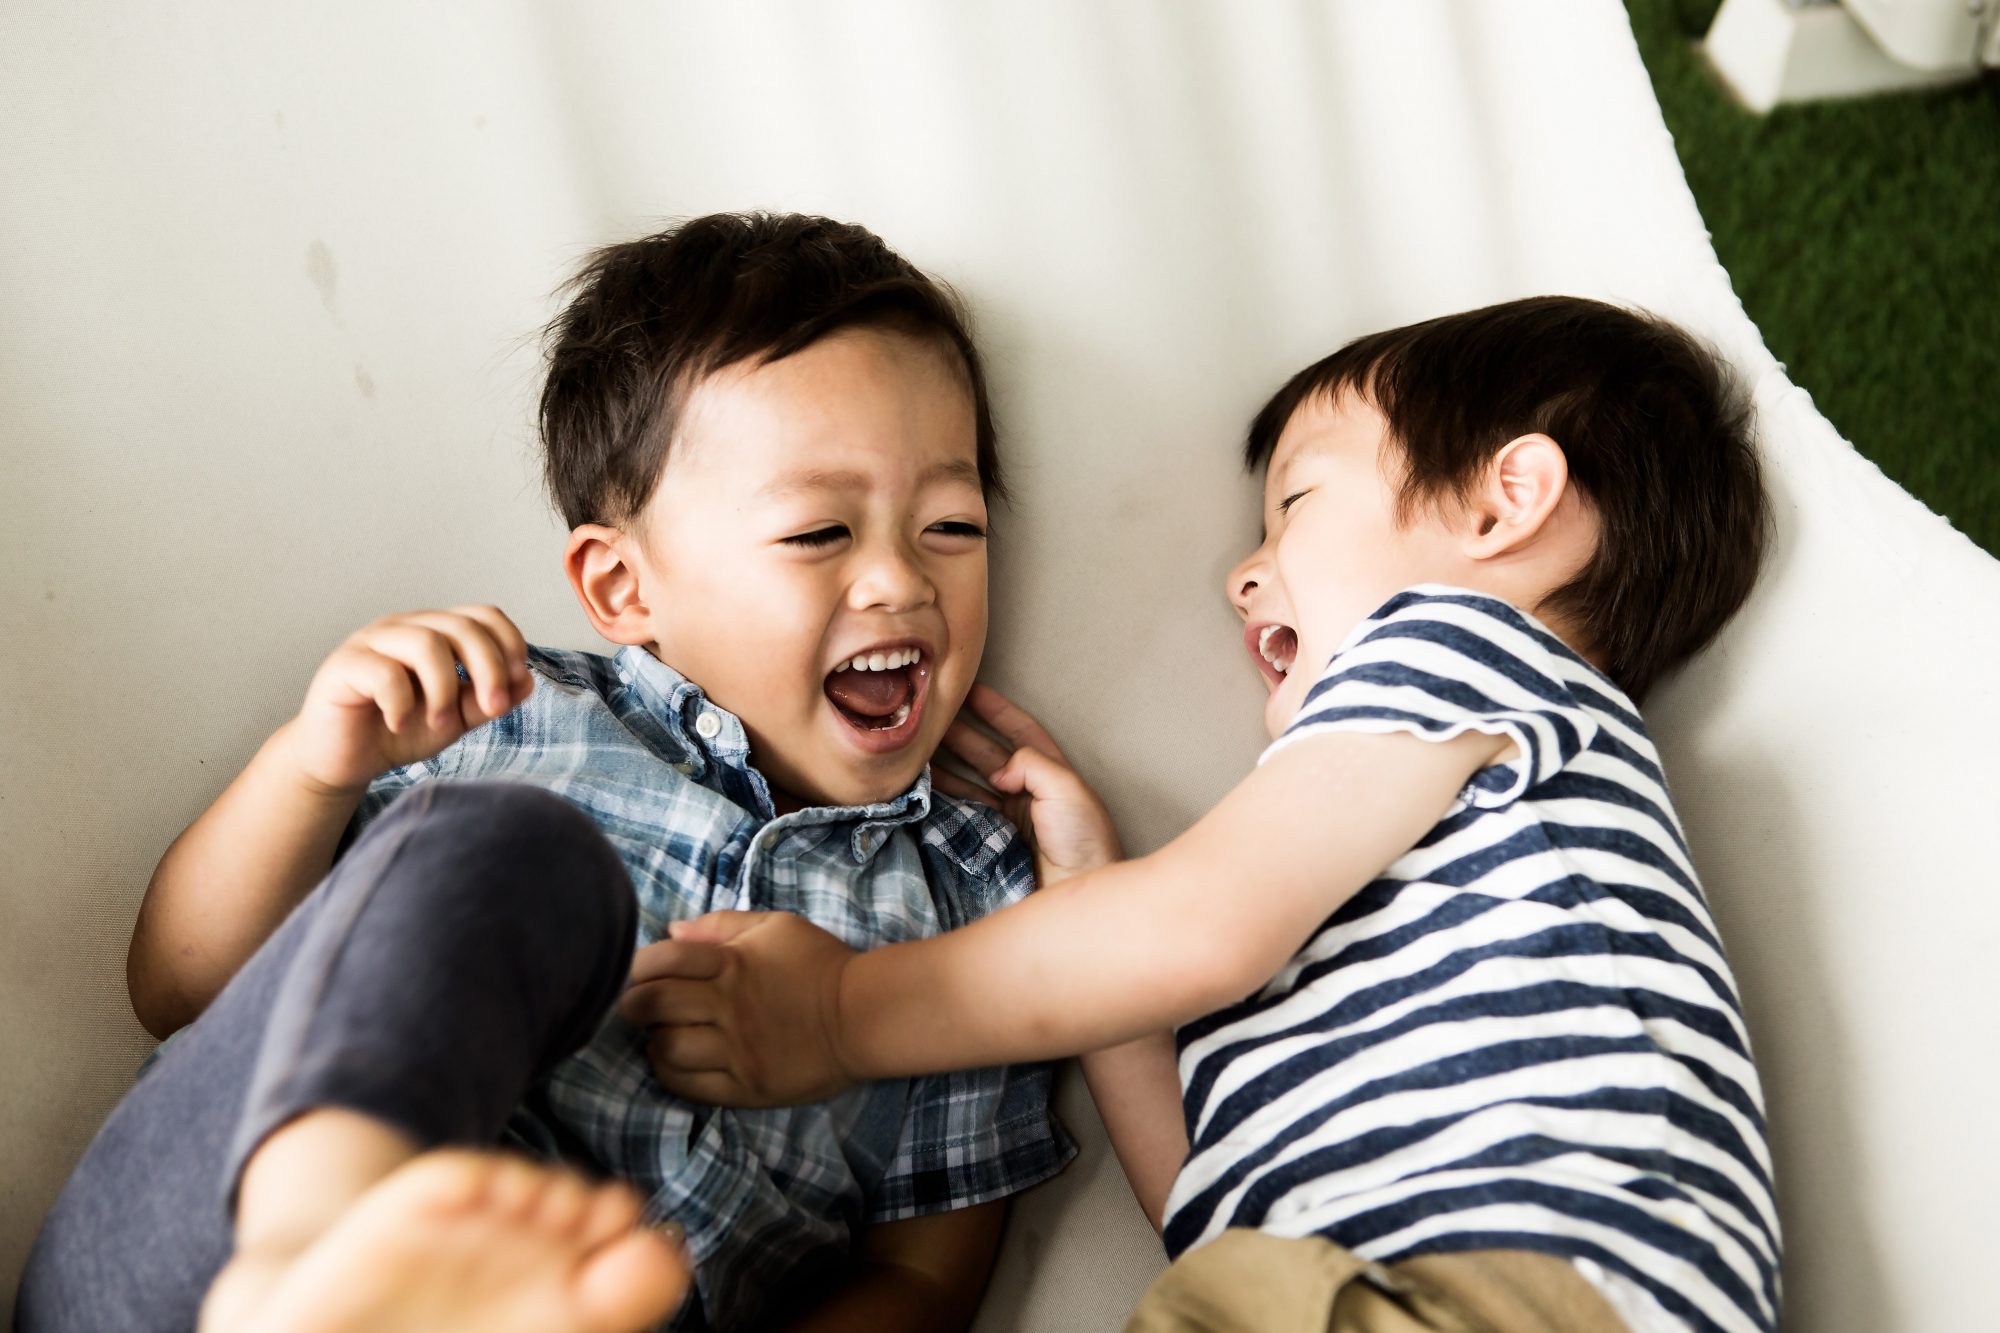 An image of two boys laughing together.